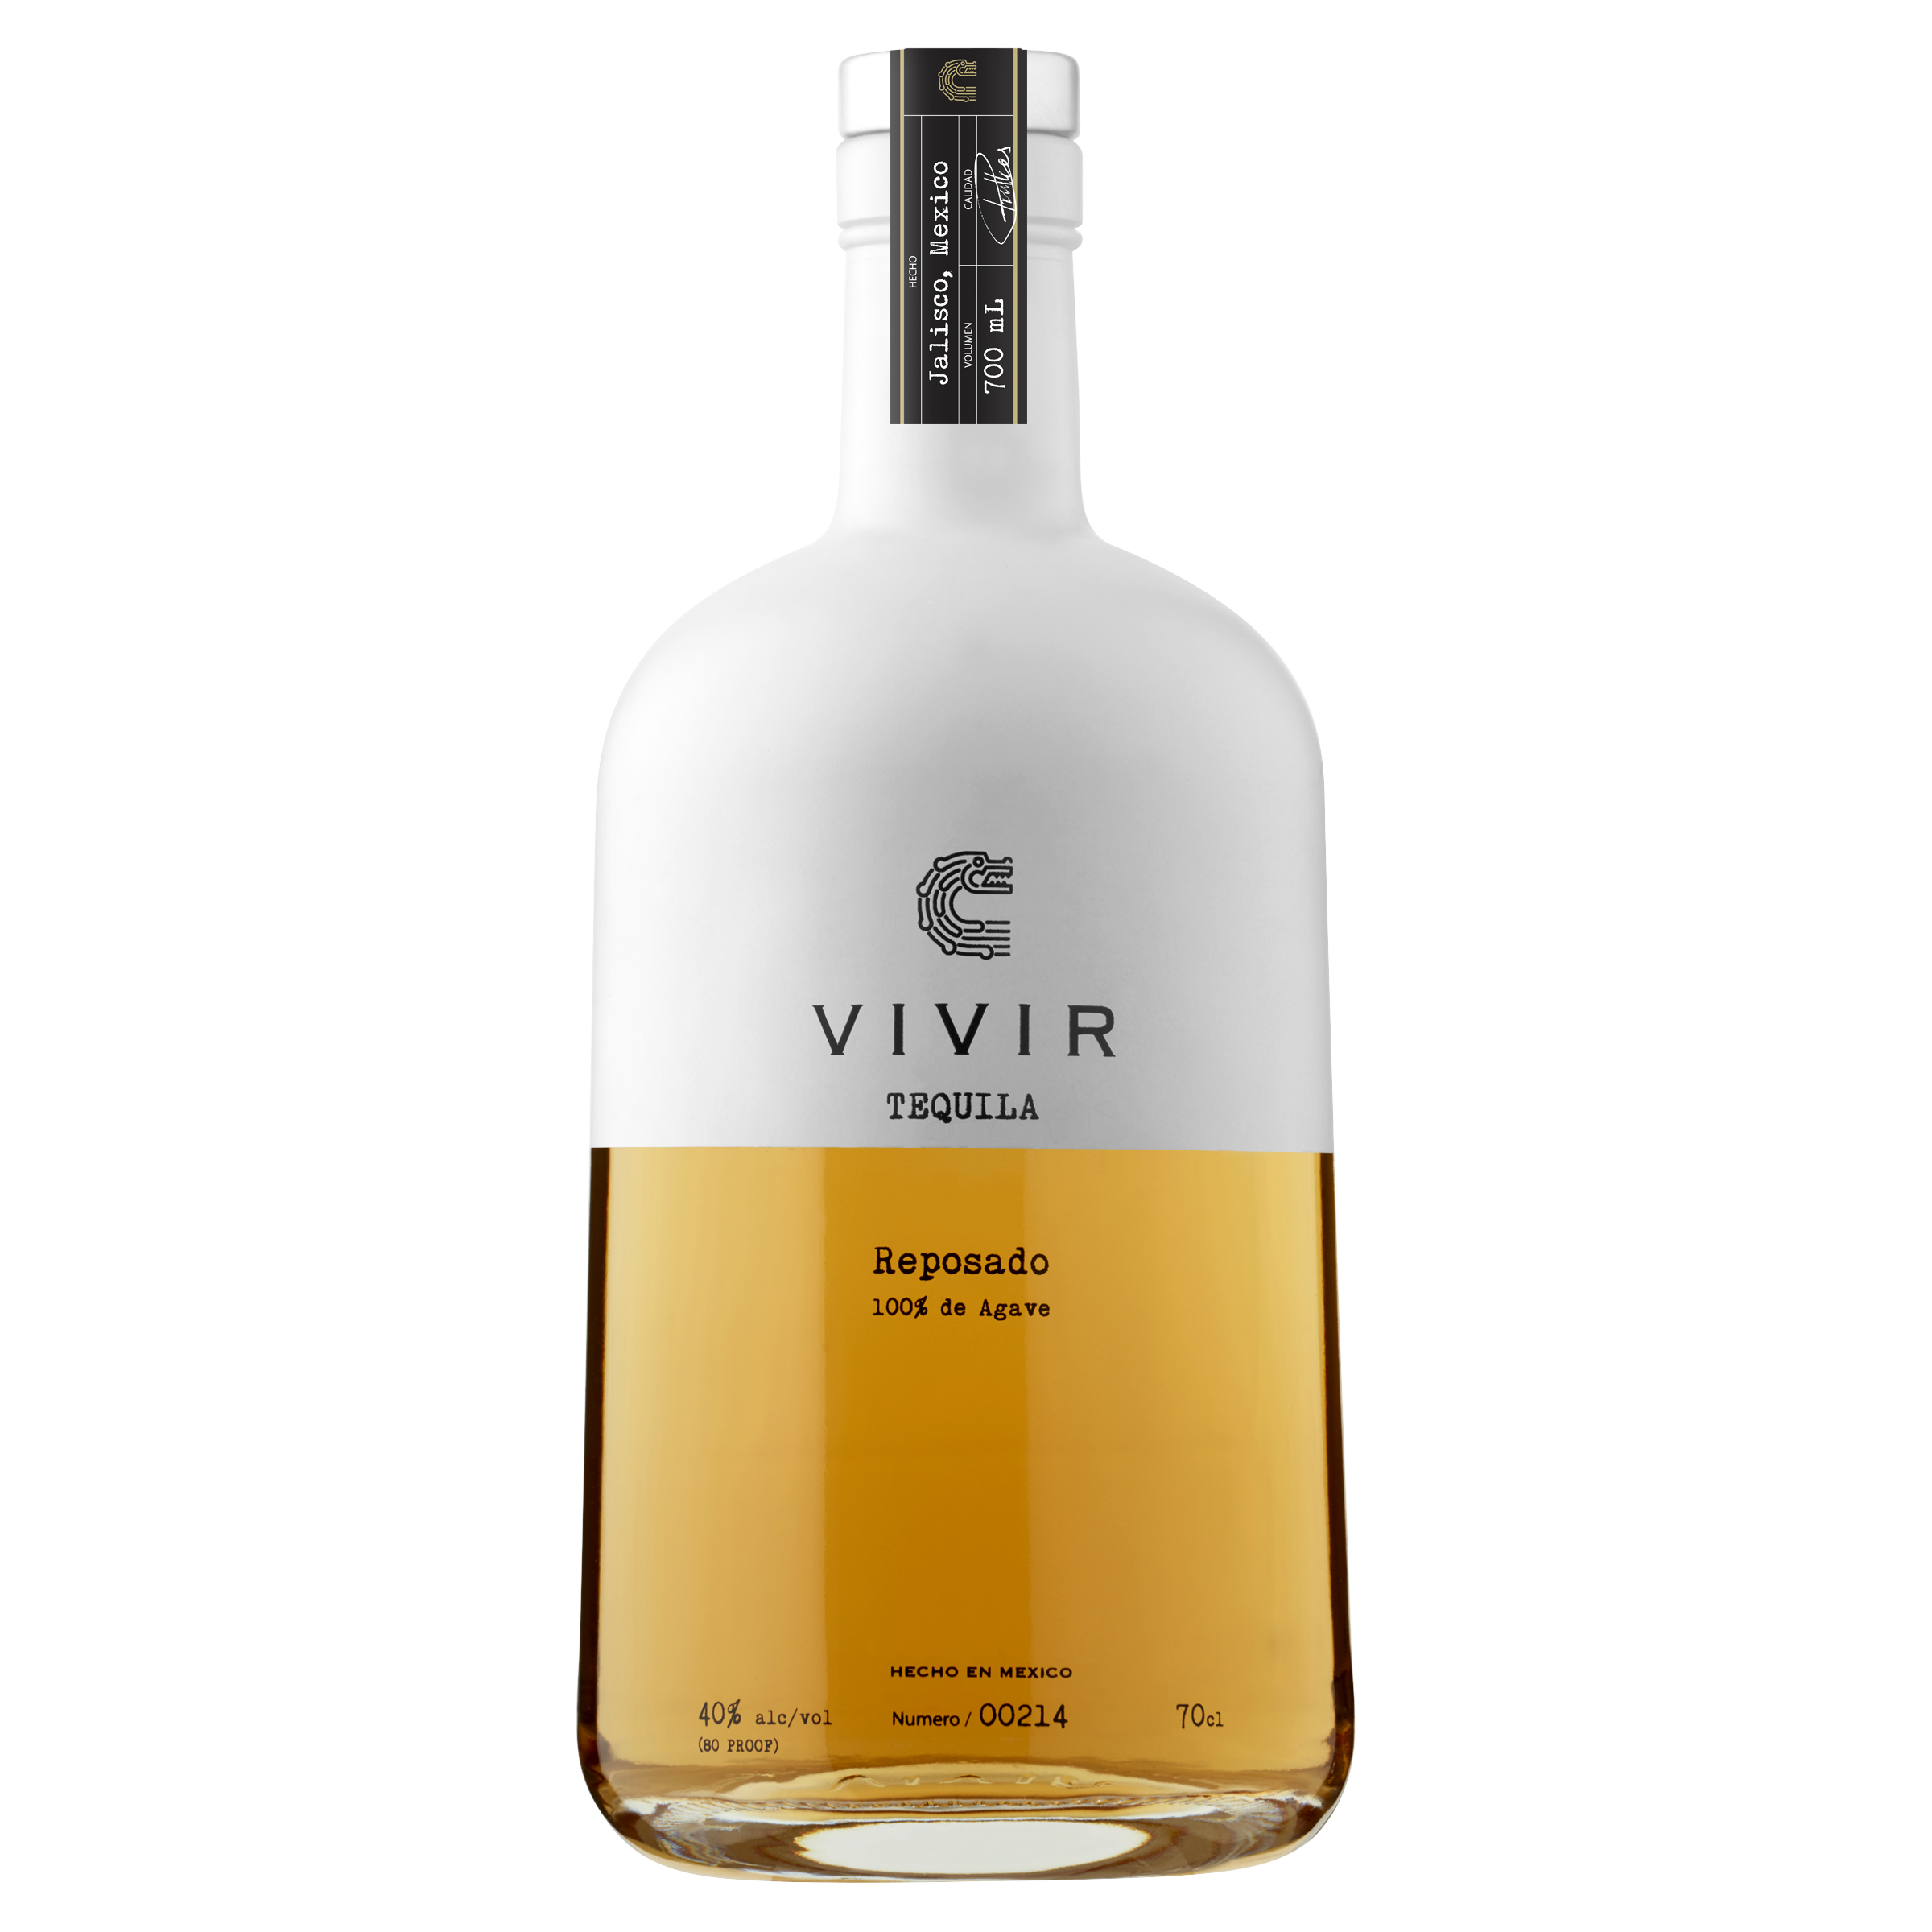 A bottle of VIVIR Tequila Reposado. The top half of the bottle is white and displays the VIVIR Tequila logo, the bottom half of the bottle is transparent and shows the light amber-coloured Tequila inside.